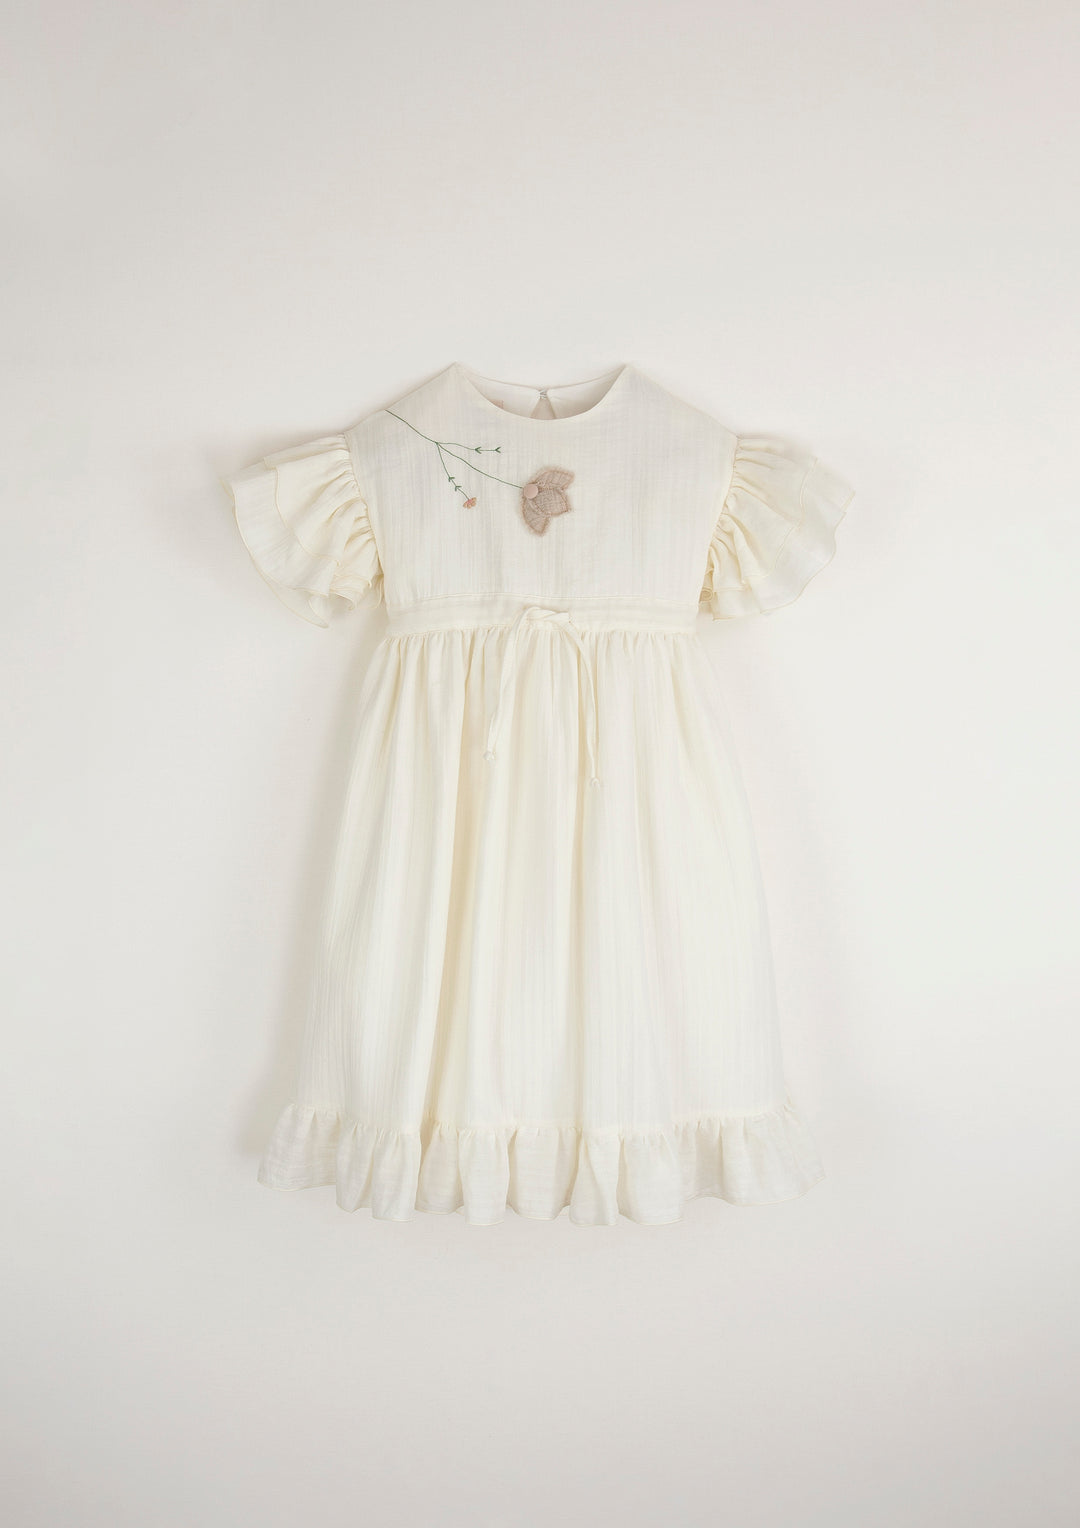 34.1 Off-white dress w/ embroidered yoke and applique